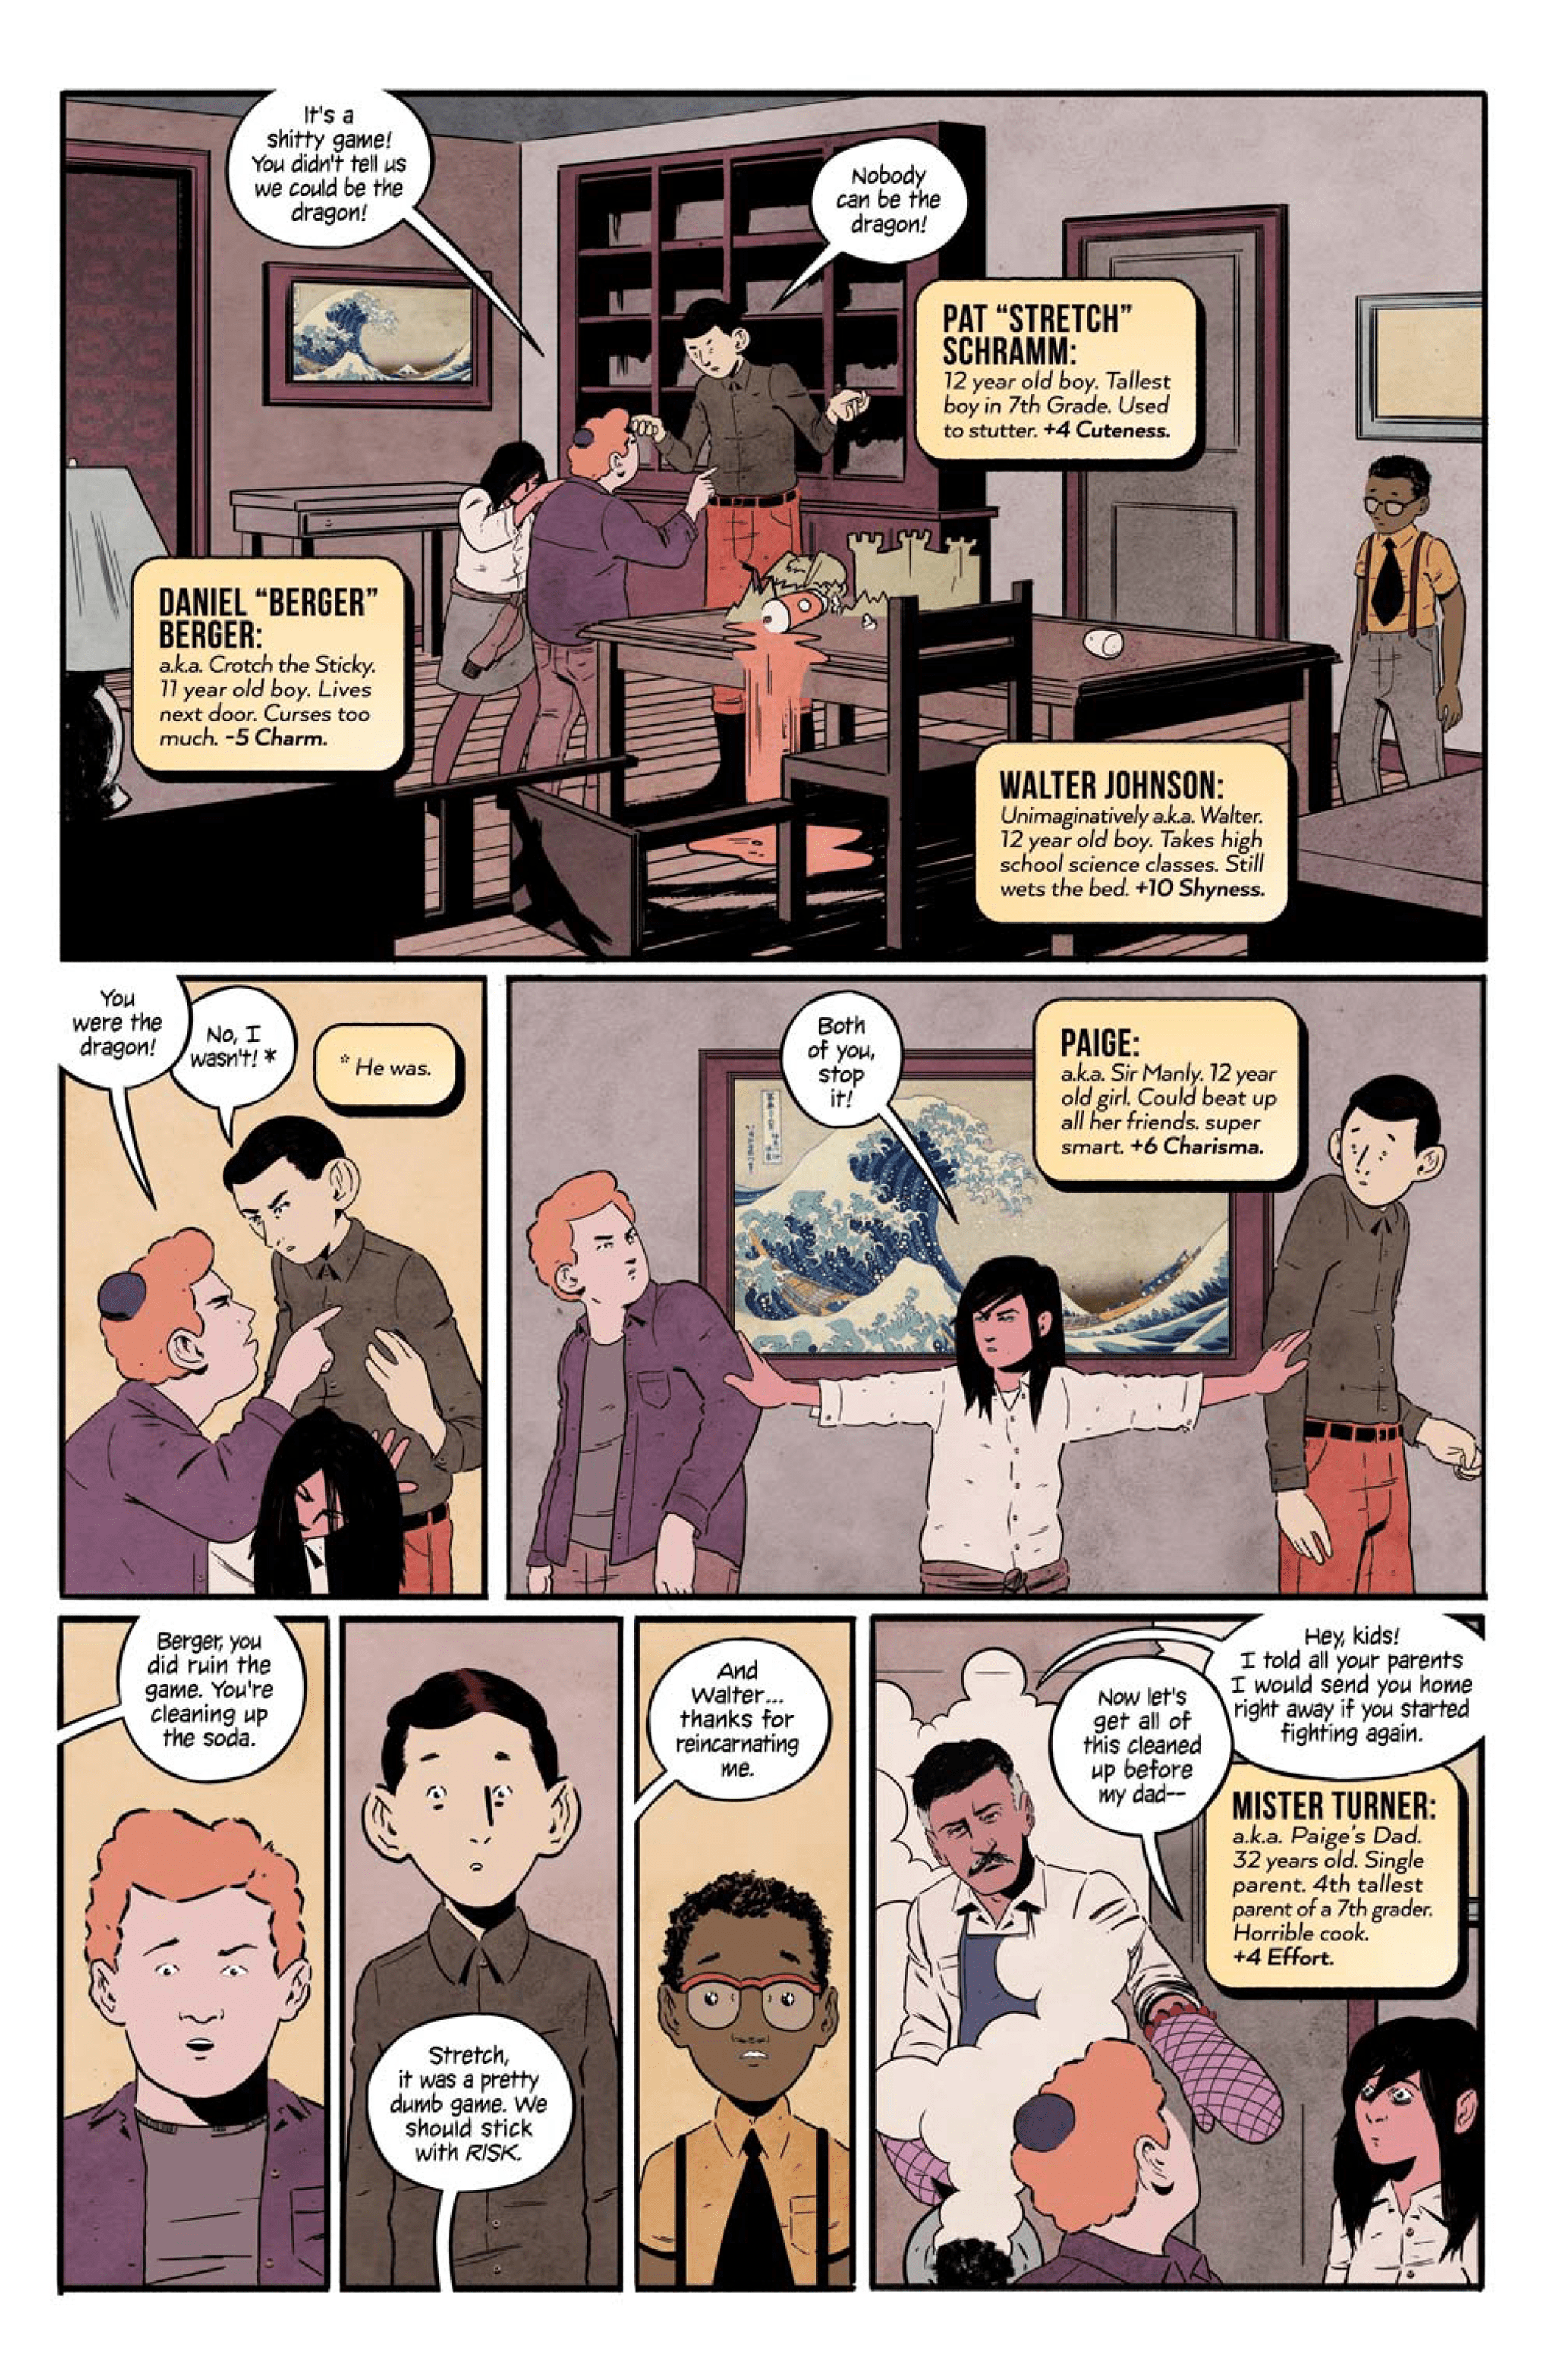 Read The First Issue Of Kid’s Crime Thriller 4 Kids Walk Into A Bank, Here For Free